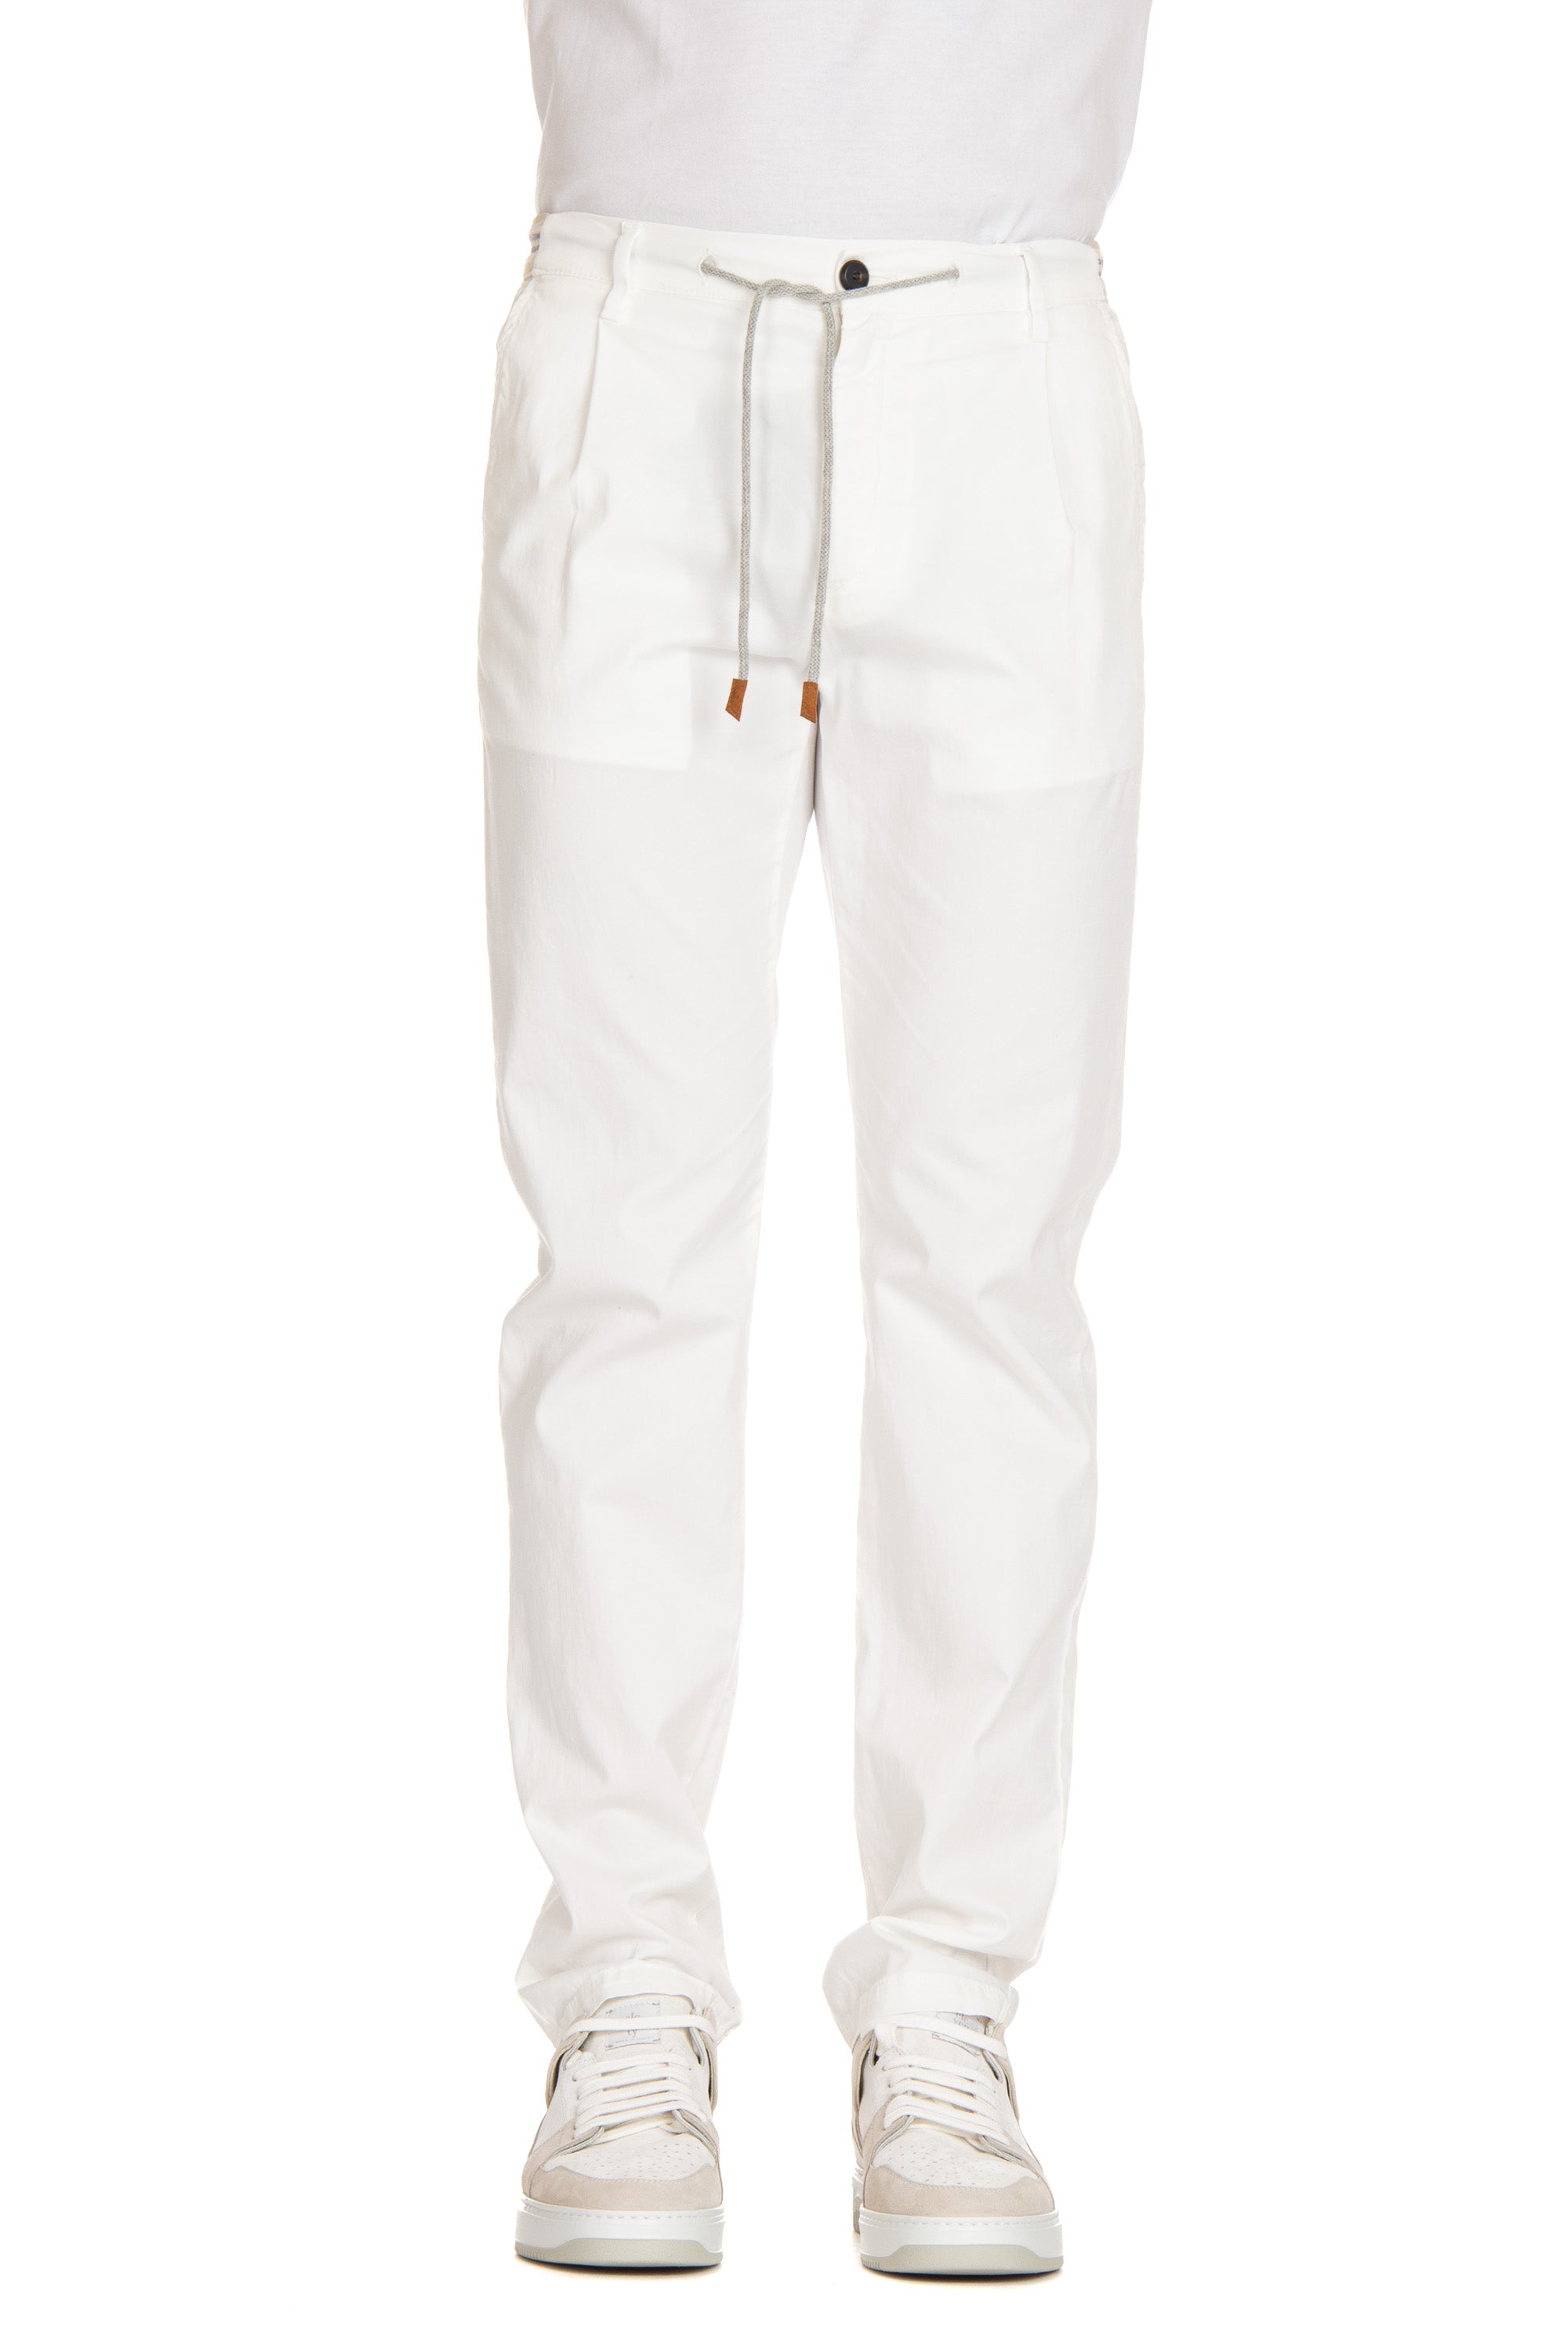 Light cotton trousers with elastic waistband